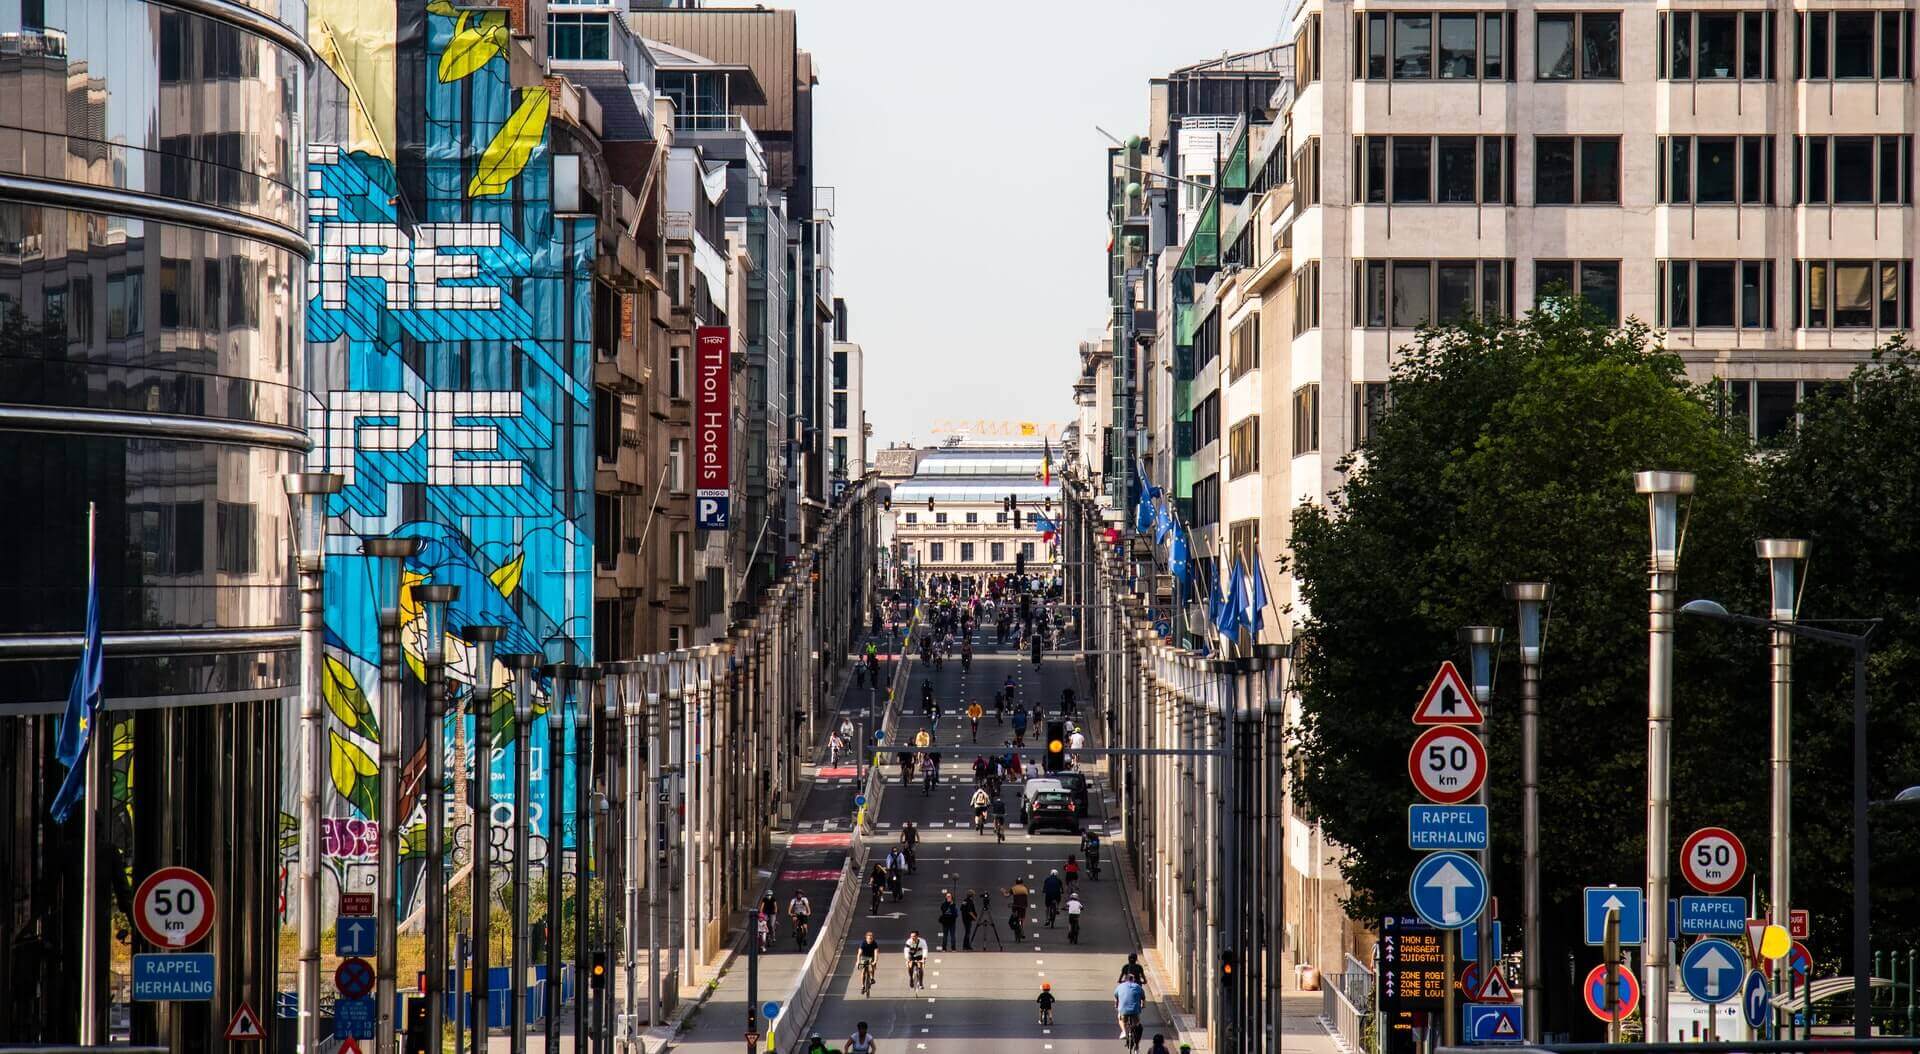 However, the maximum amount of incentive recently nearly doubled from €500 to €900. The idea is that people will stop using cars altogether and instead use the extra cash to travel via eco-friendly alternatives. Pictured: Car-free day, Brussels 2020